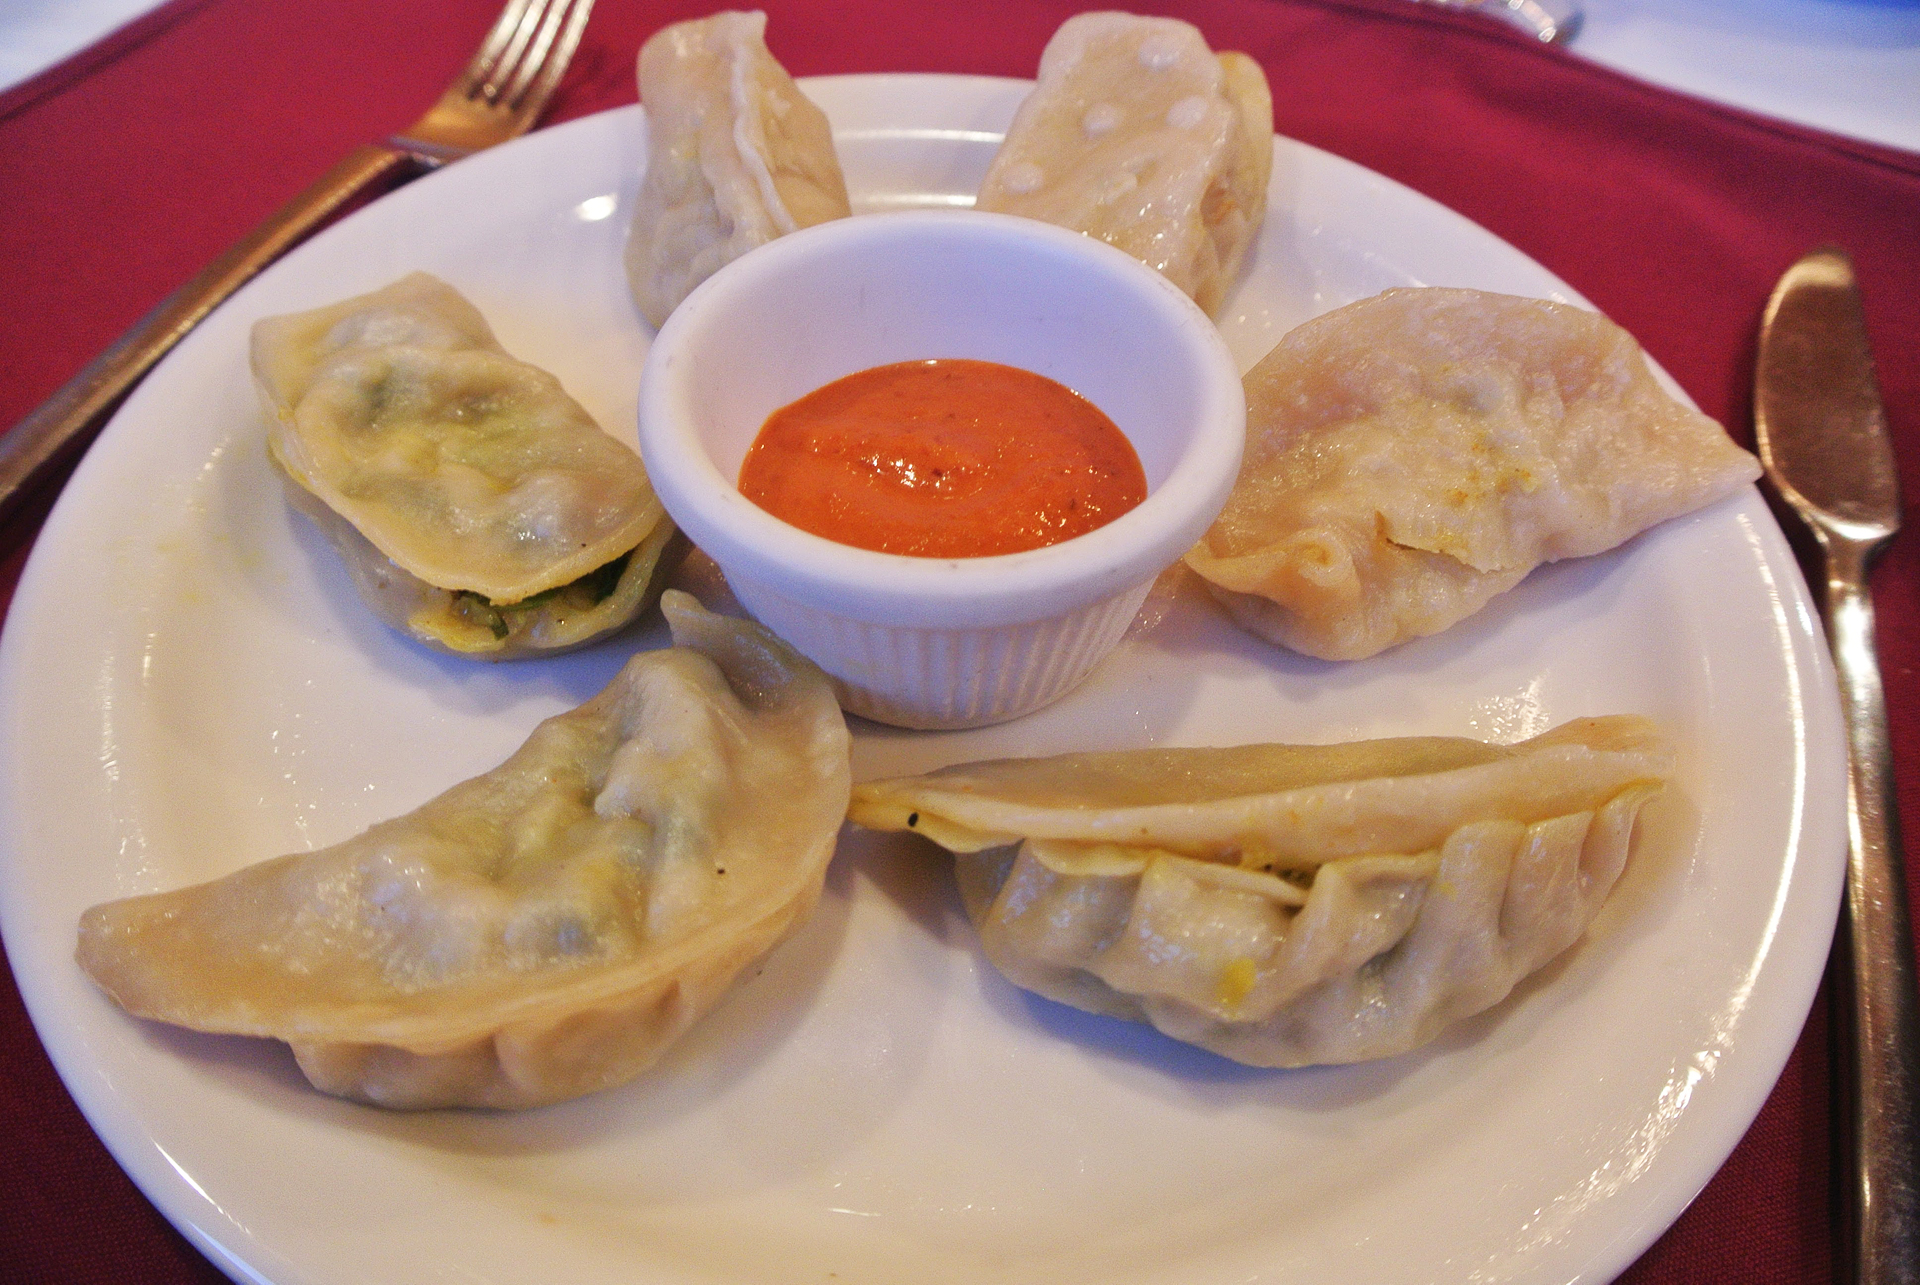 Momos at Little Nepal